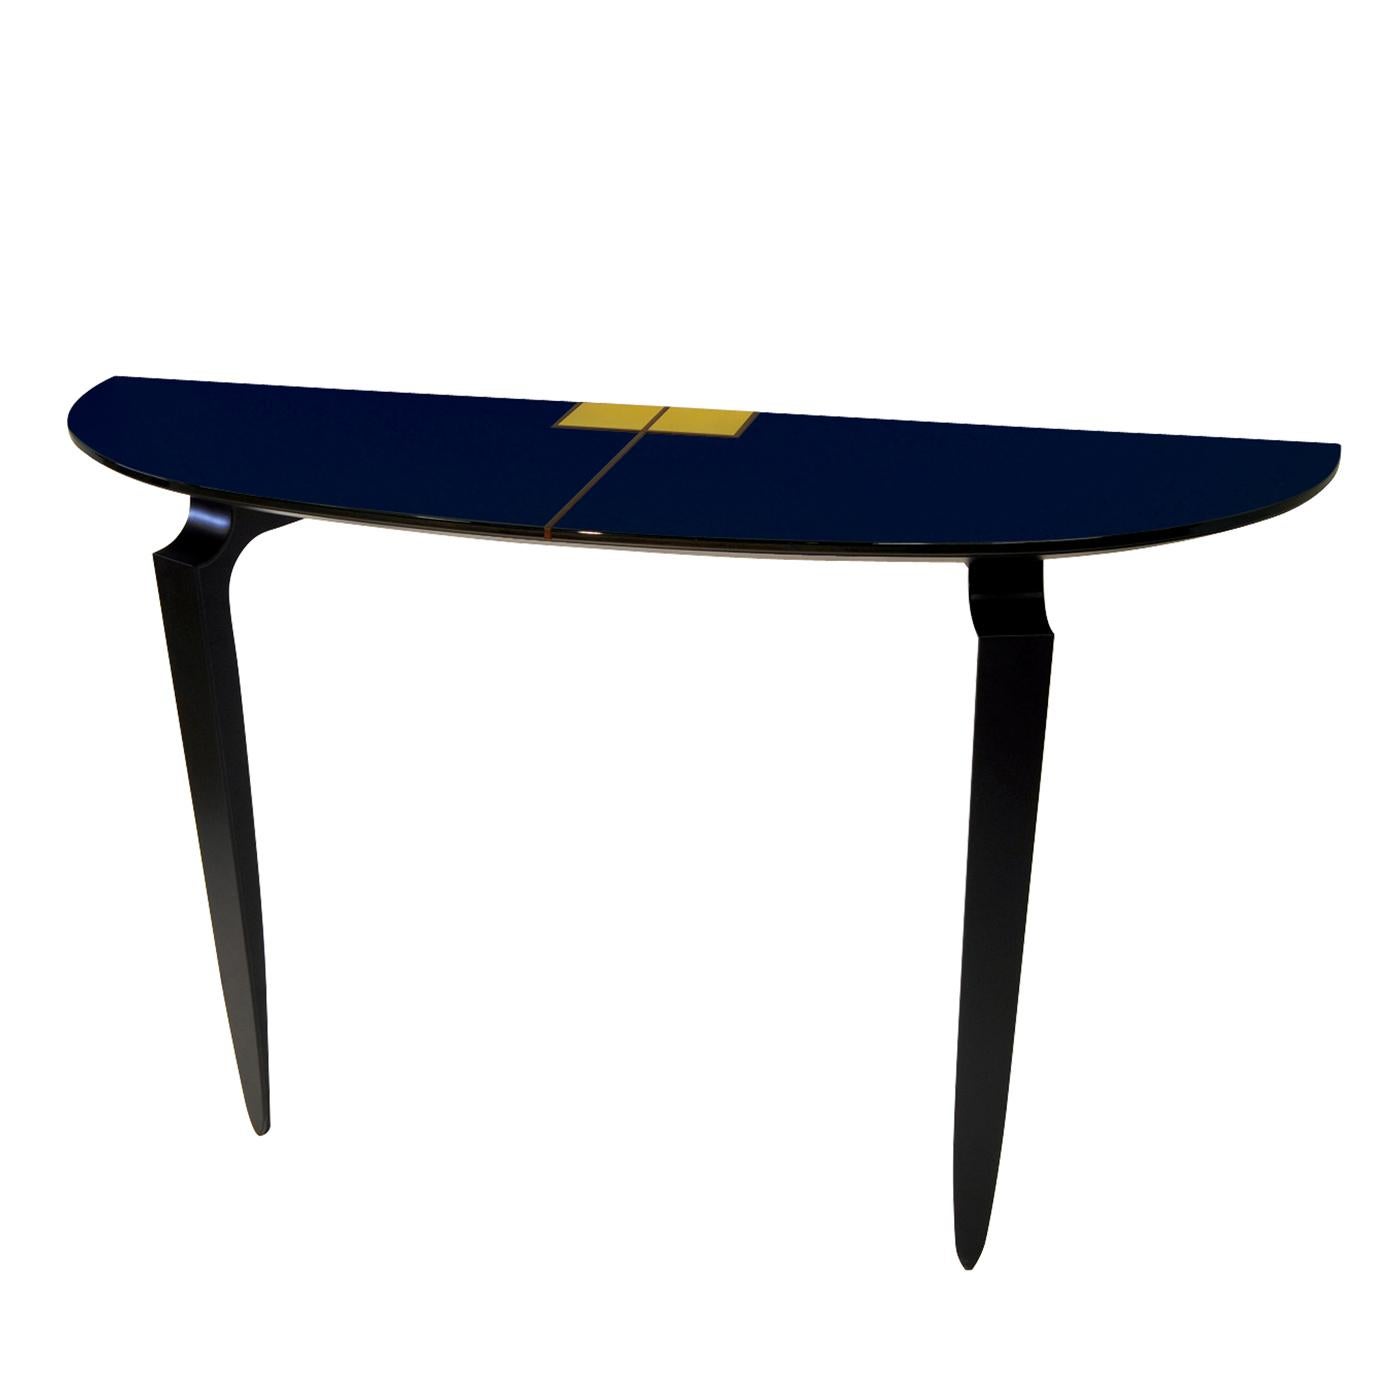 Timeless elegance and refined sophistication characterize this superb console. Boasting a demi-lune shape, the top is fashioned of wood with a shiny Navy blue polyurethane lacquer, and is enriched with an impeccable inlay in Makassar ebony. The firm